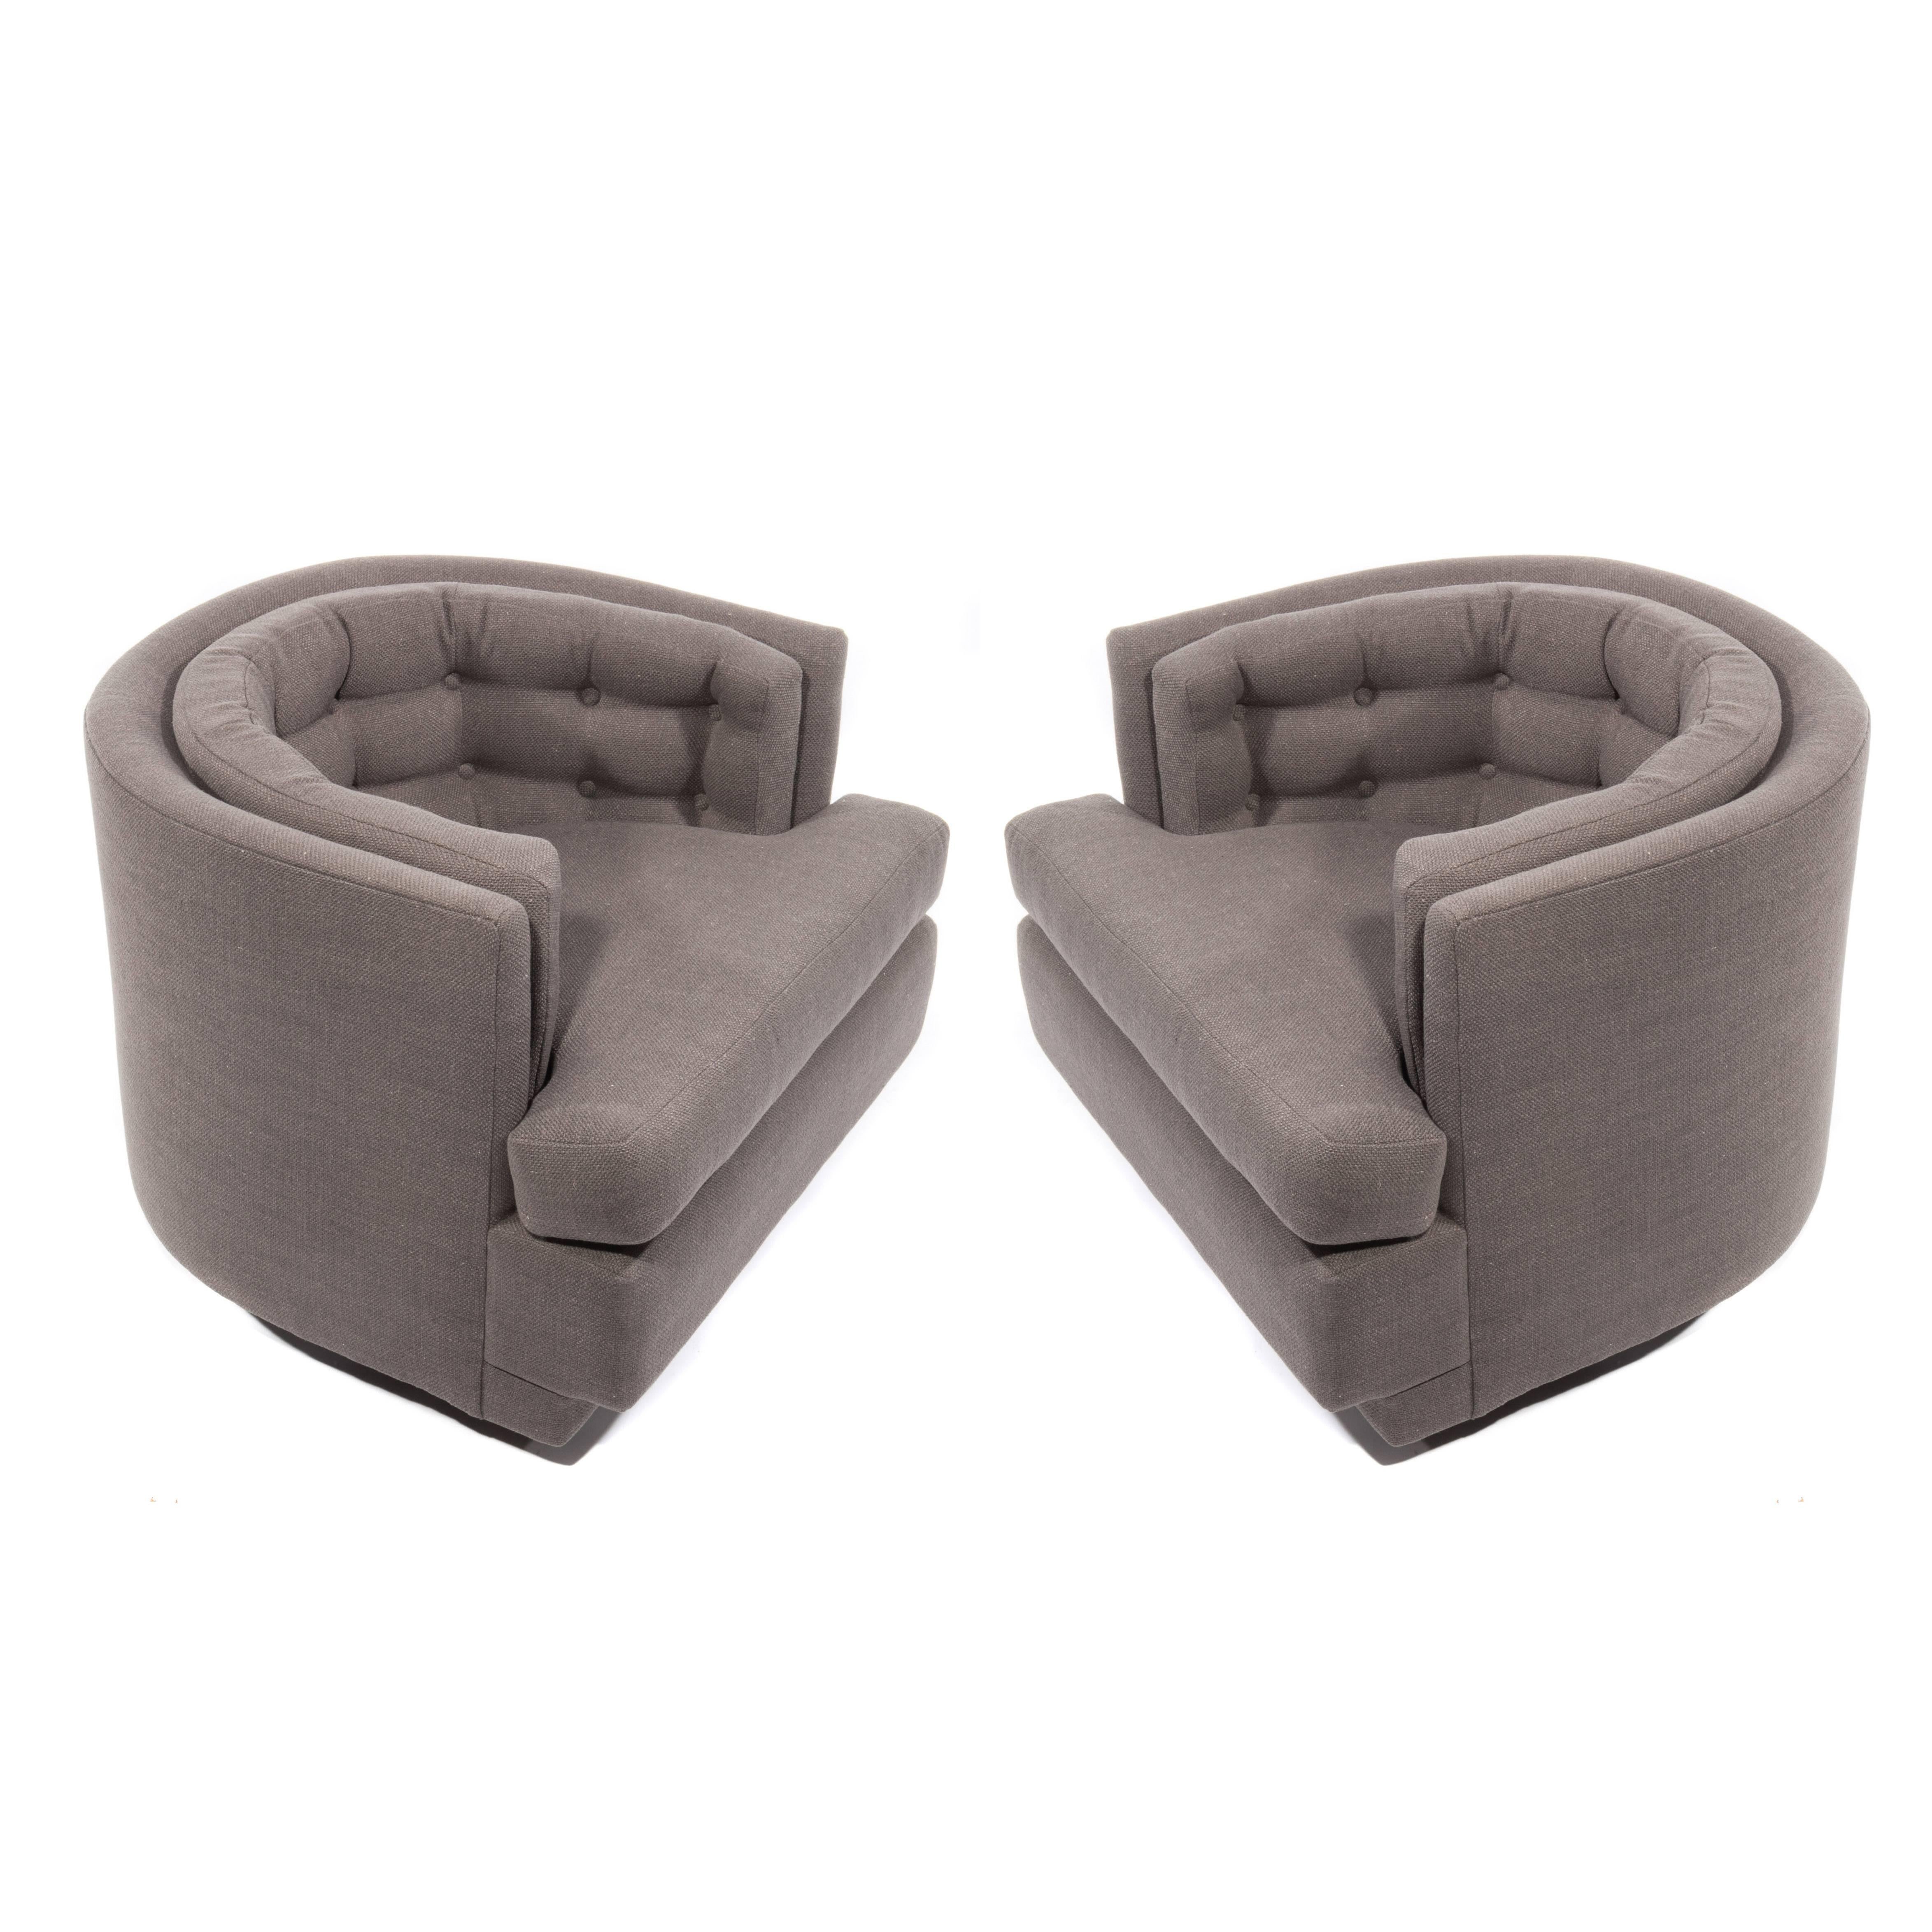 Pair of 1970s Barrel-Back Swivel Club Chairs